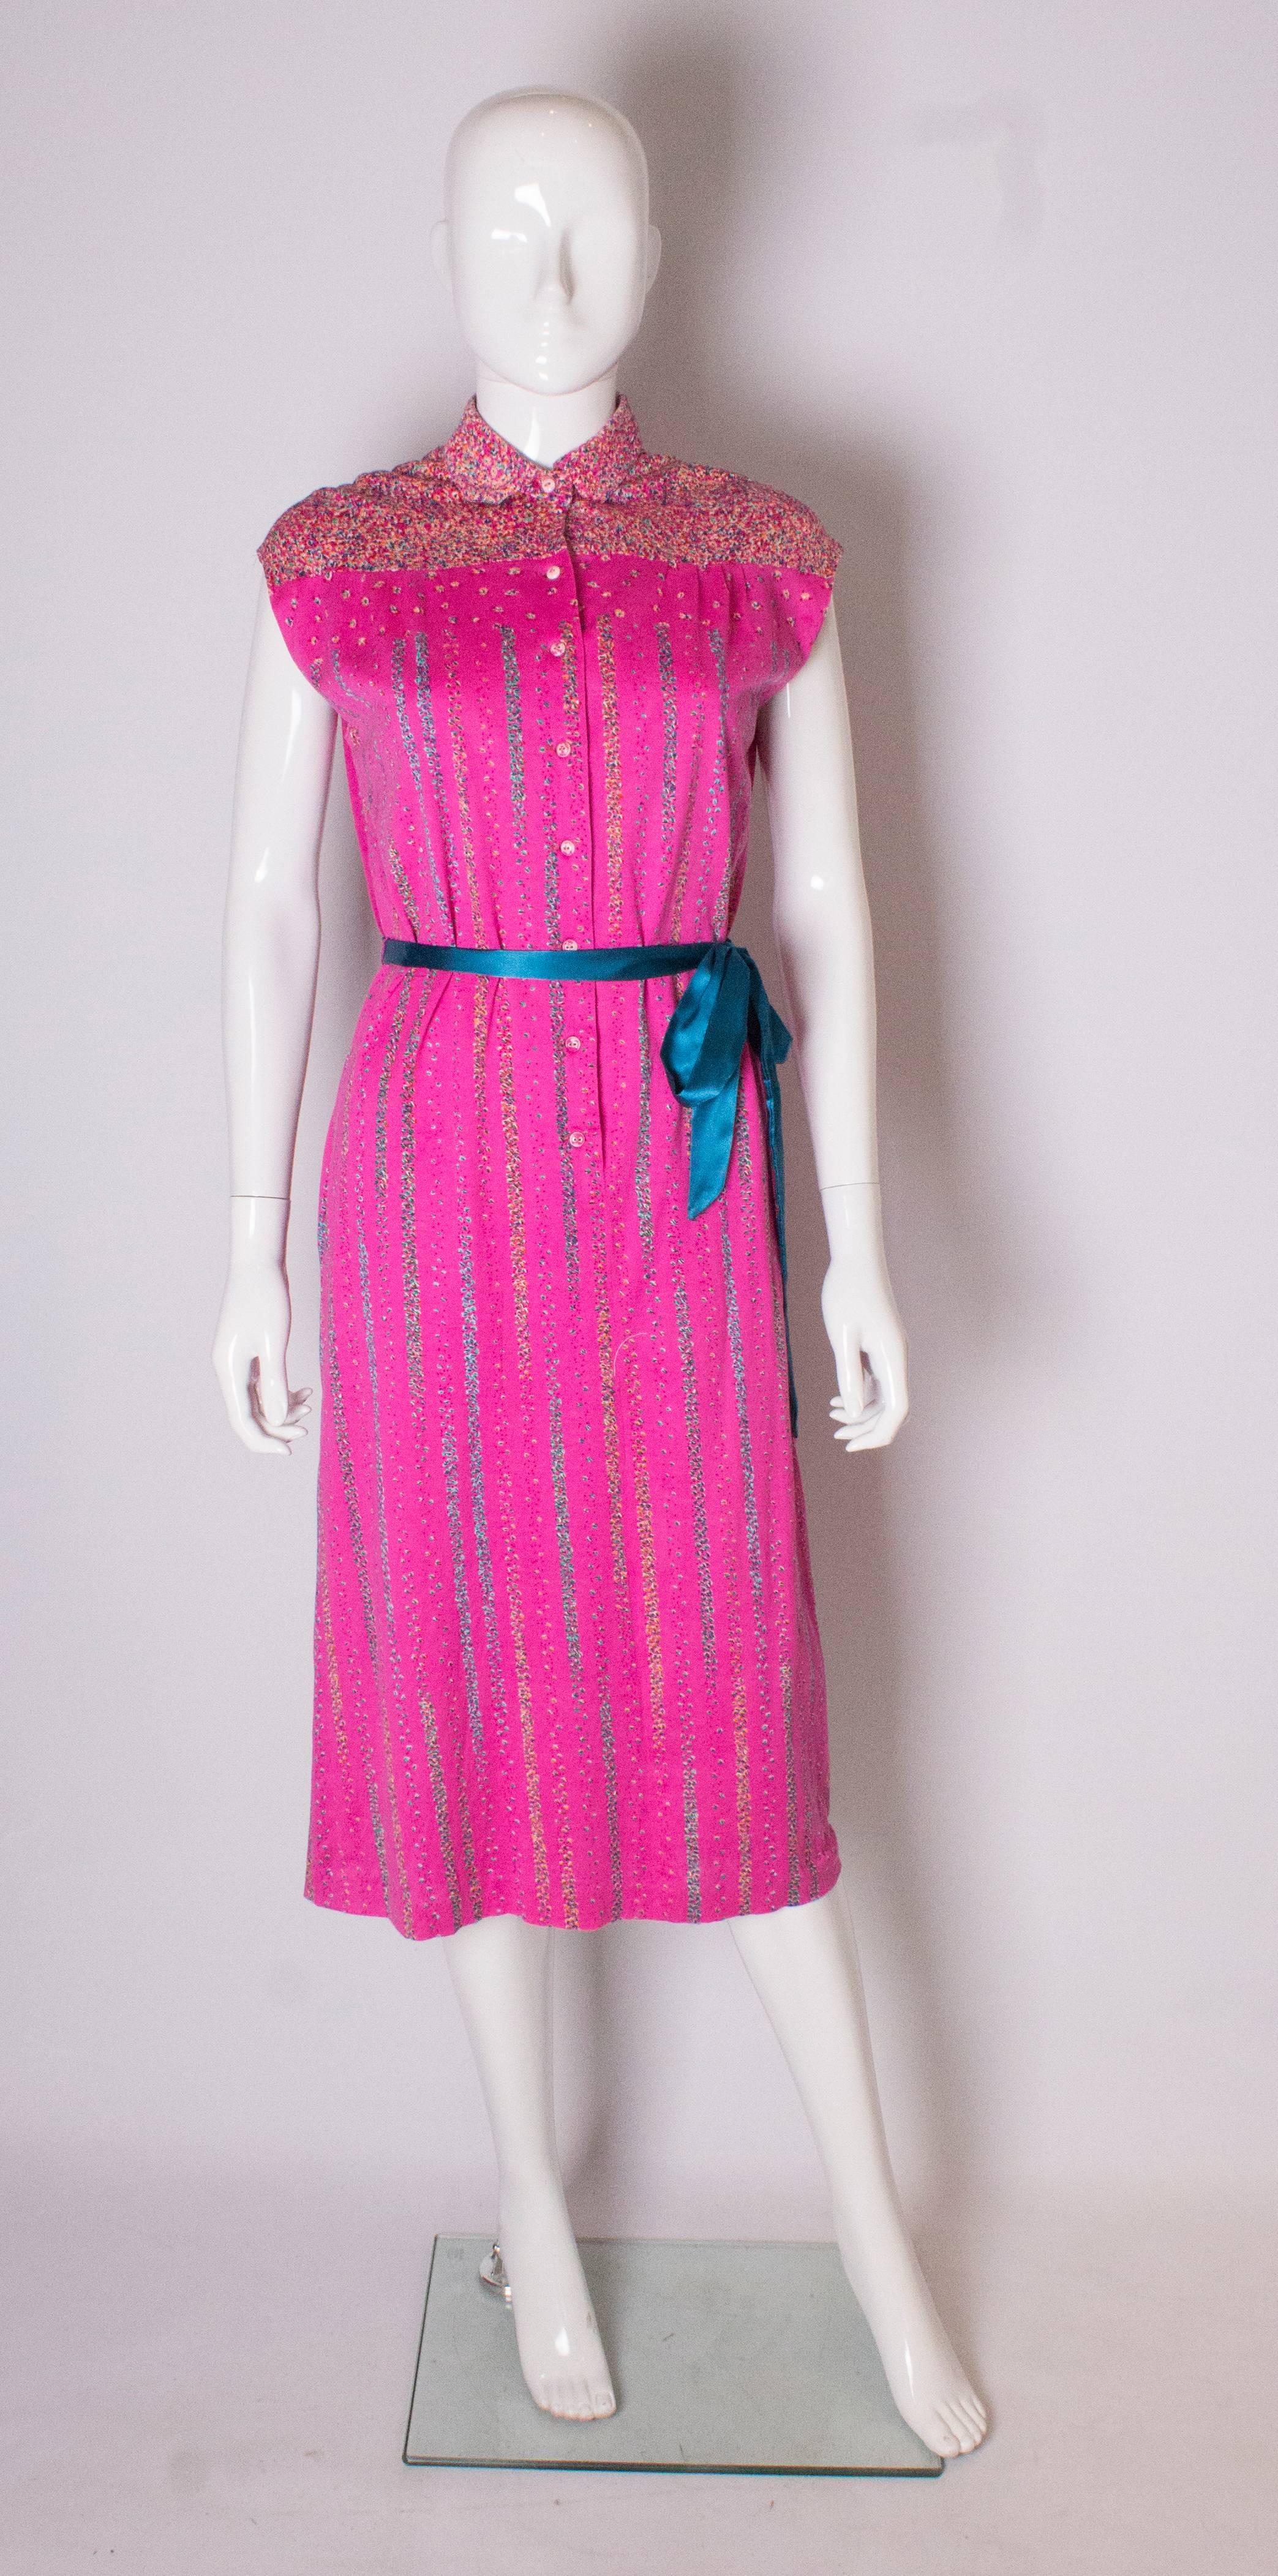 A pretty vintage pink cotton day dress by Fink. The dress has a printed collar and yoke, with an 8 button front opening, pockets on either side and belt hoops. It is fully lined.
